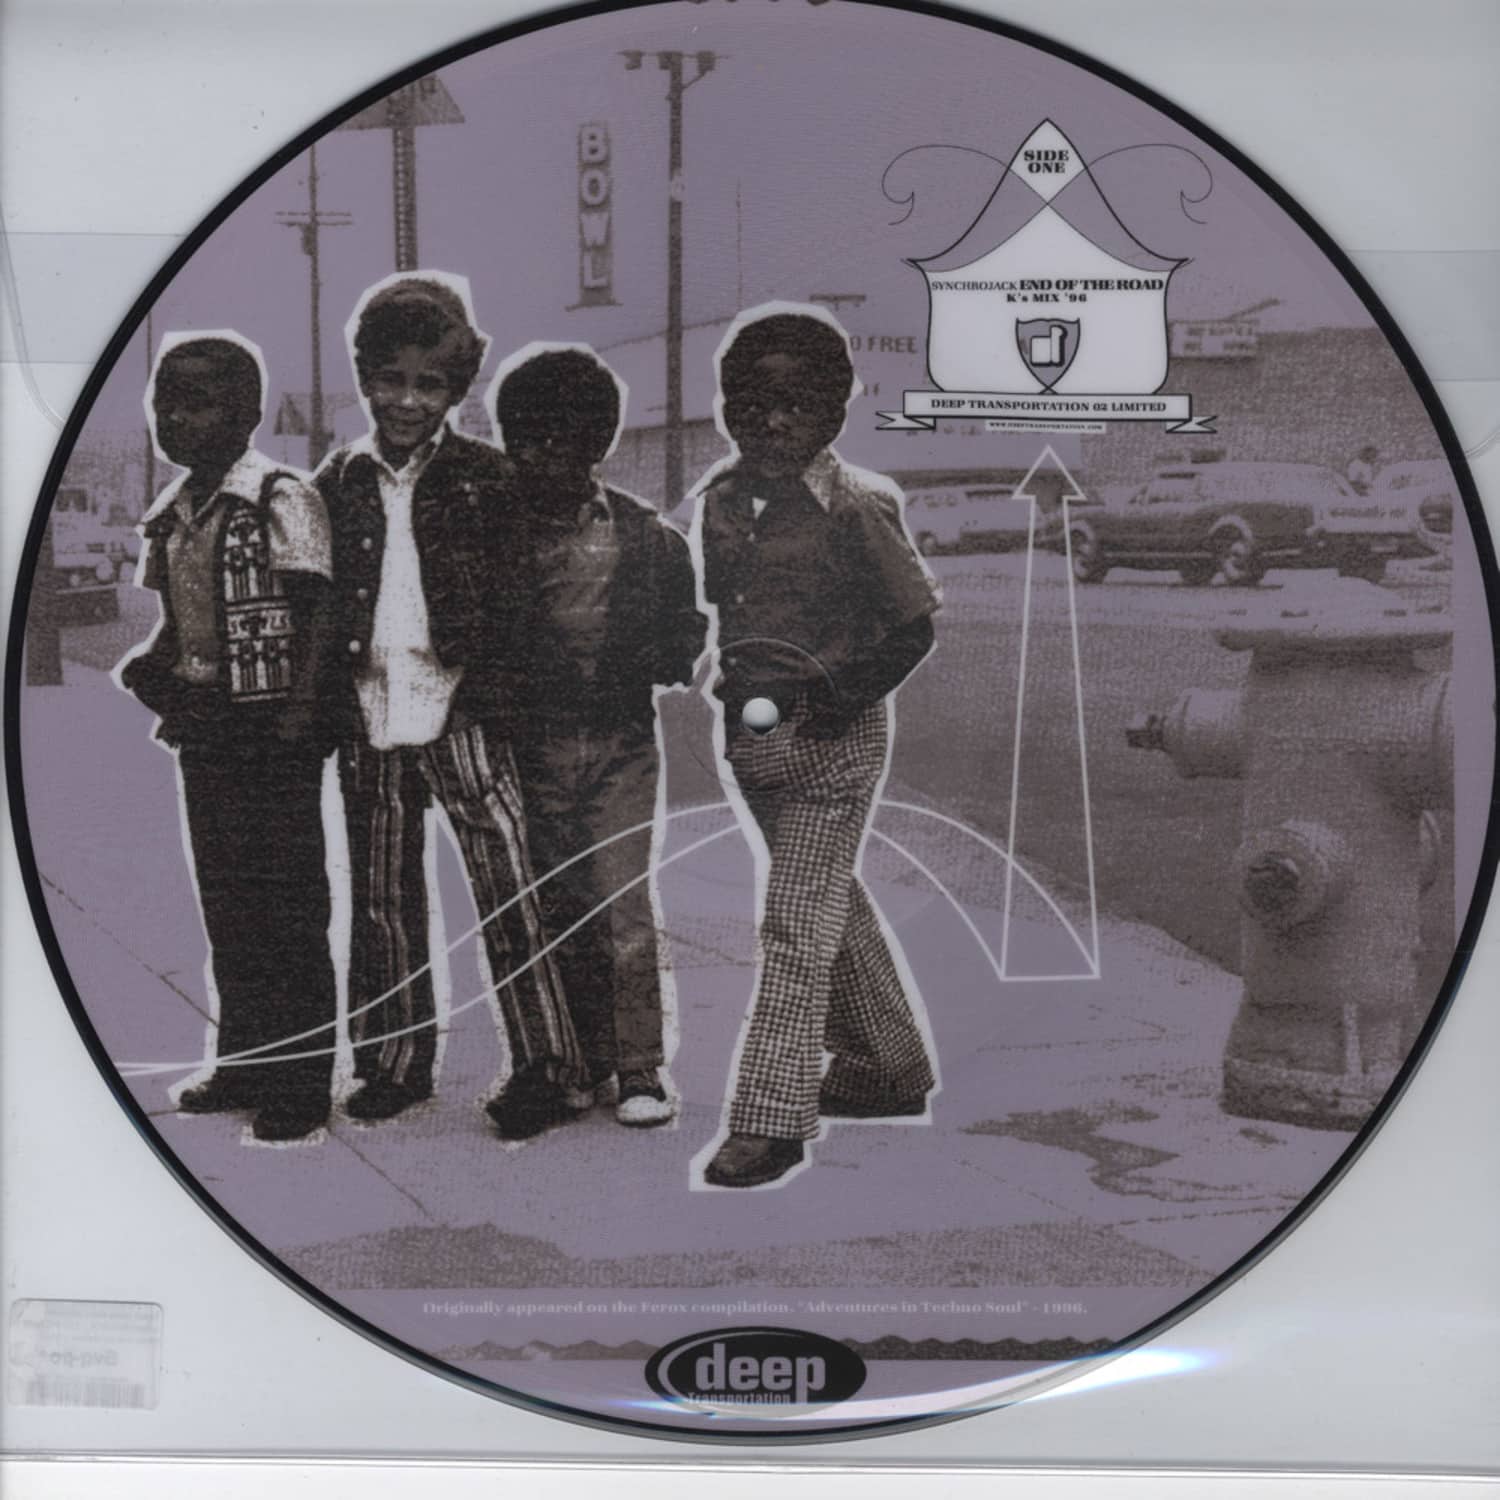 Kenny Dixon / Mike Huckaby - SYNCHROJACK / LTD PICTURE DISC